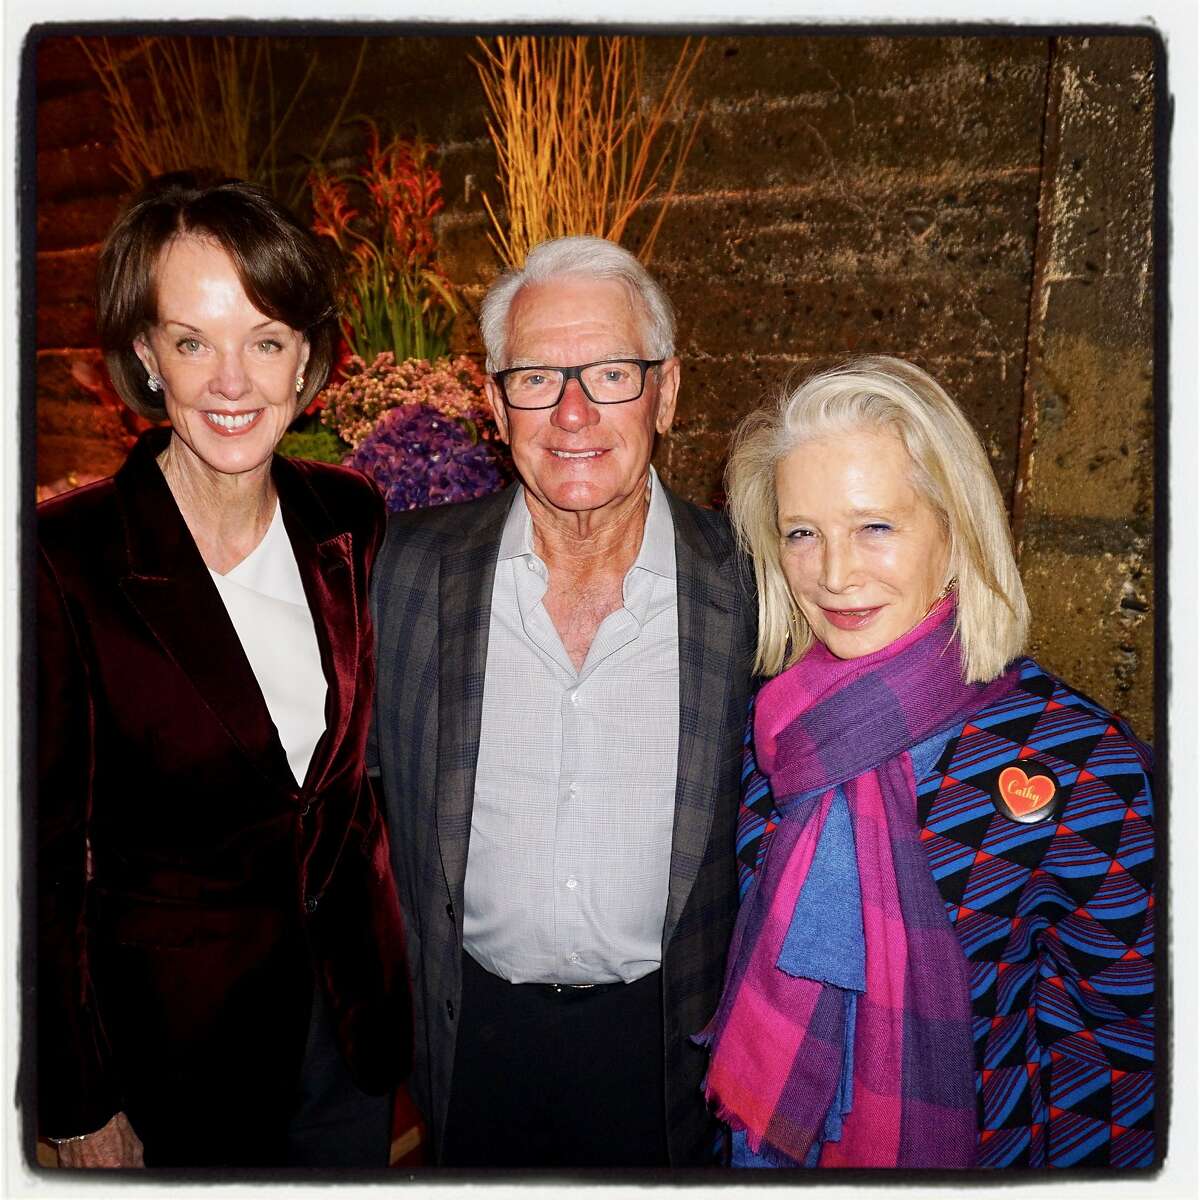 Helen (left) and Chuck Schwab with Fog honorary chair Mimi Haas at the benefactor party she hosted at the Stanlee Gatti Atelier in January 2017.